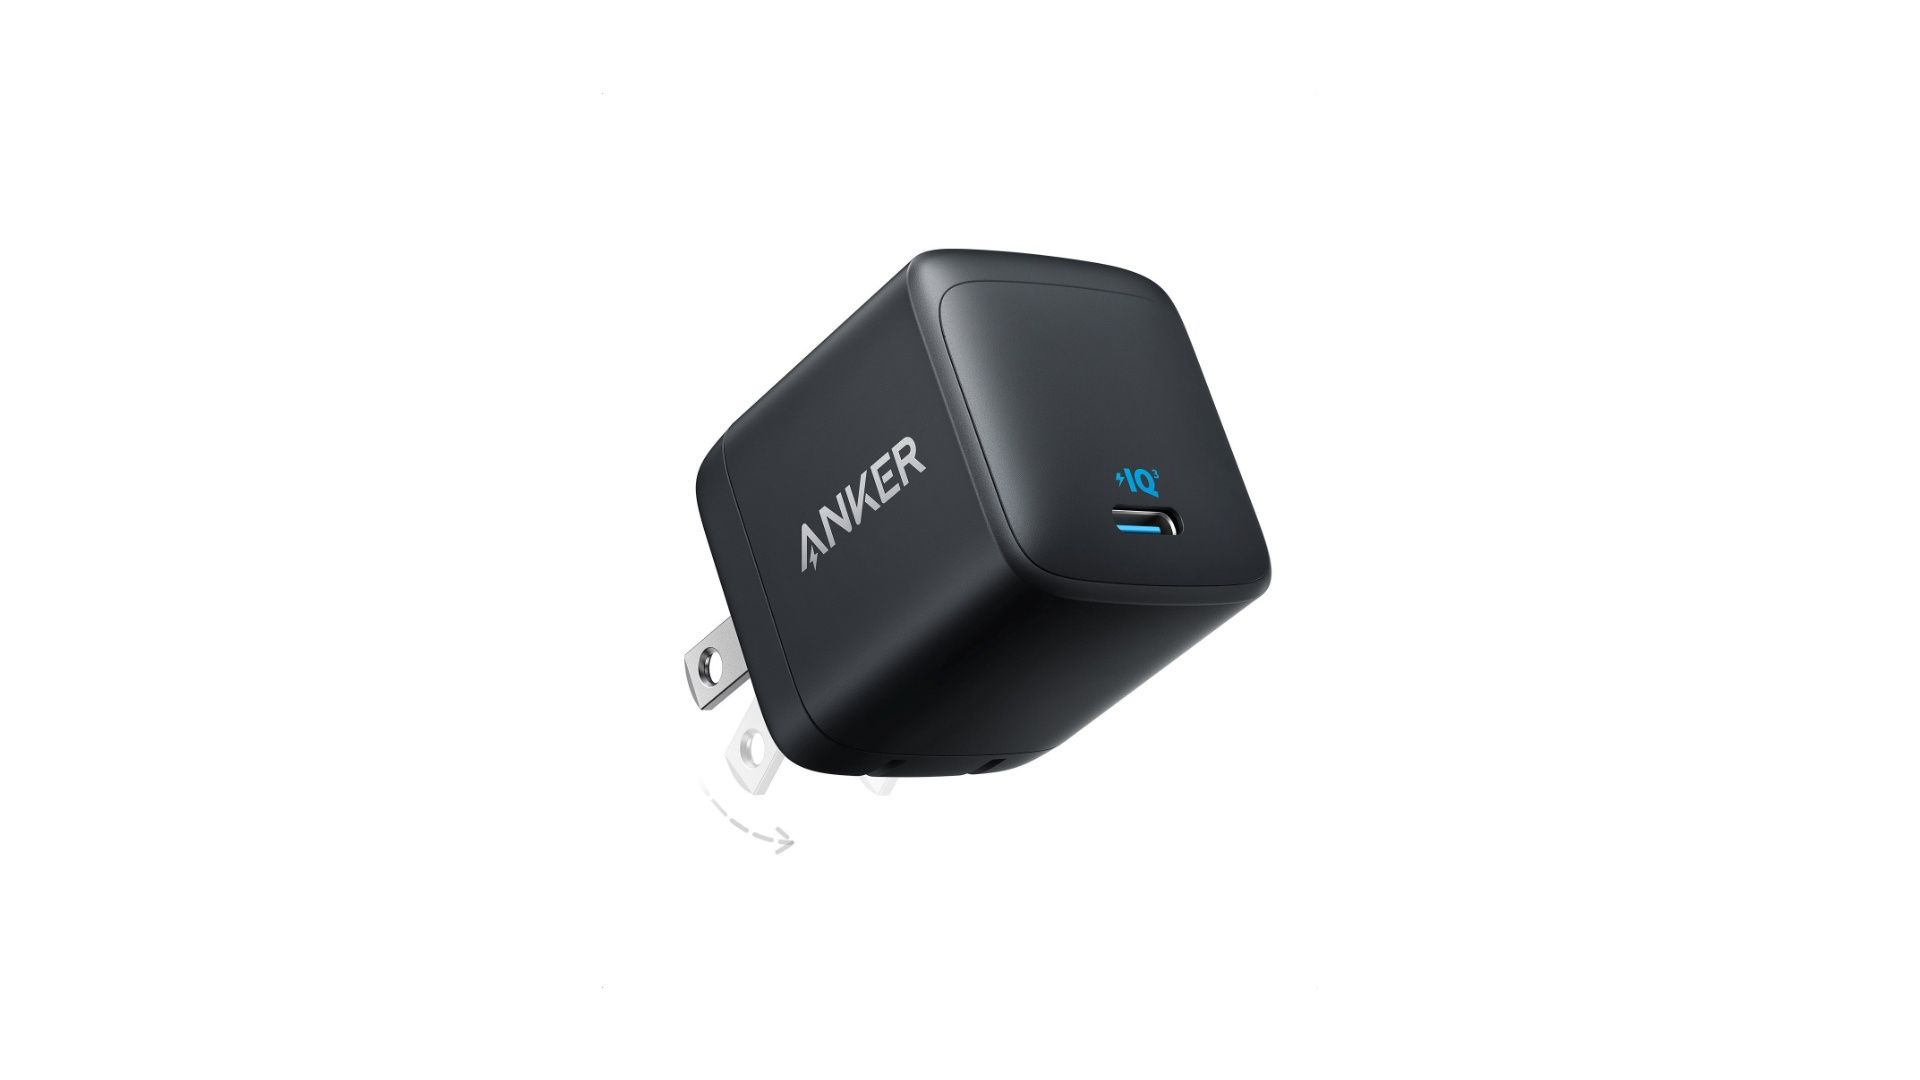 anker 313 ace charger